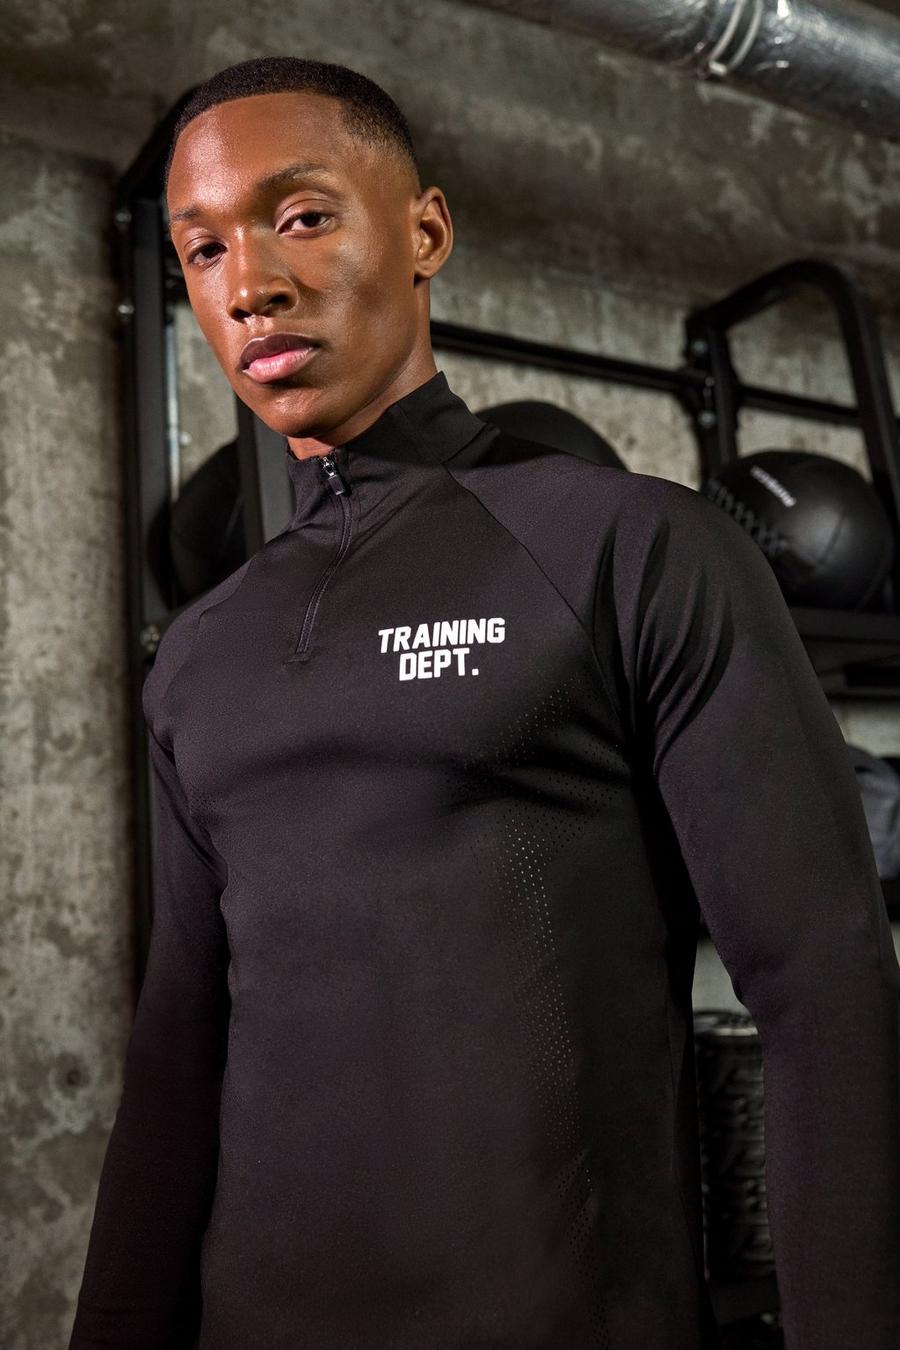 Black Active Training Dept Muscle Fit Perforated Quarter Zip Top